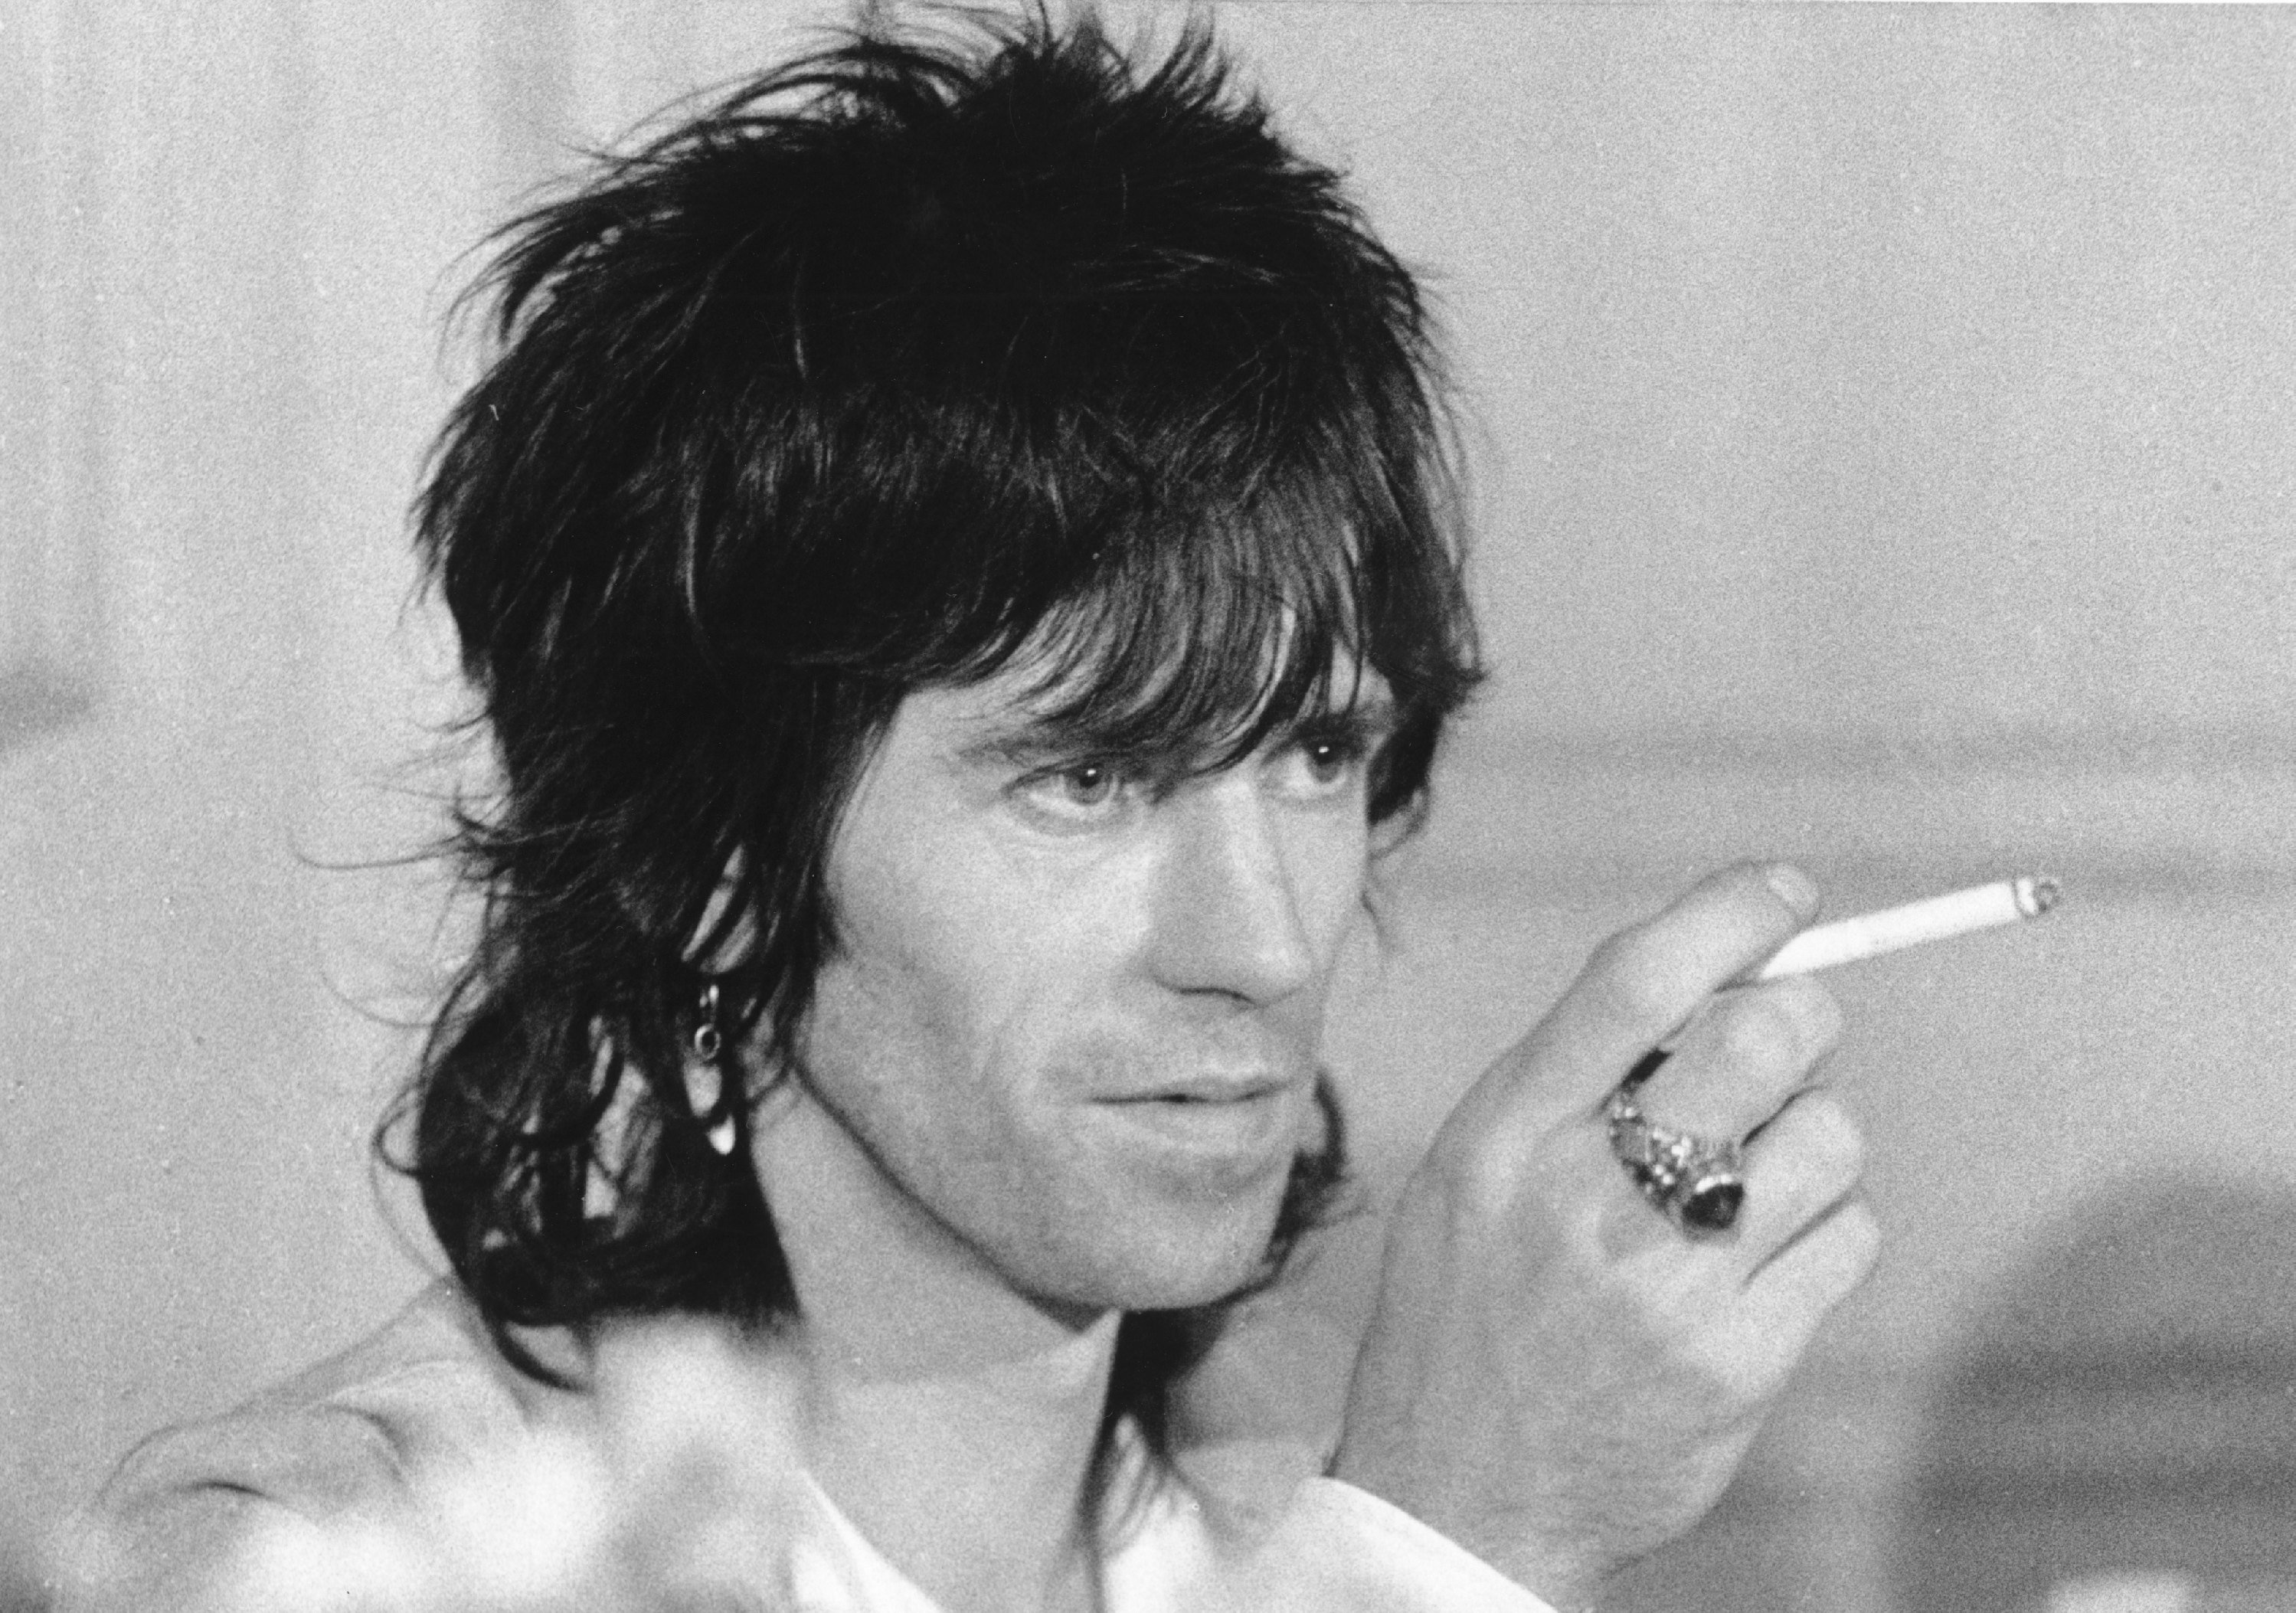 The Rolling Stones' Keith Richards holding a cigarette